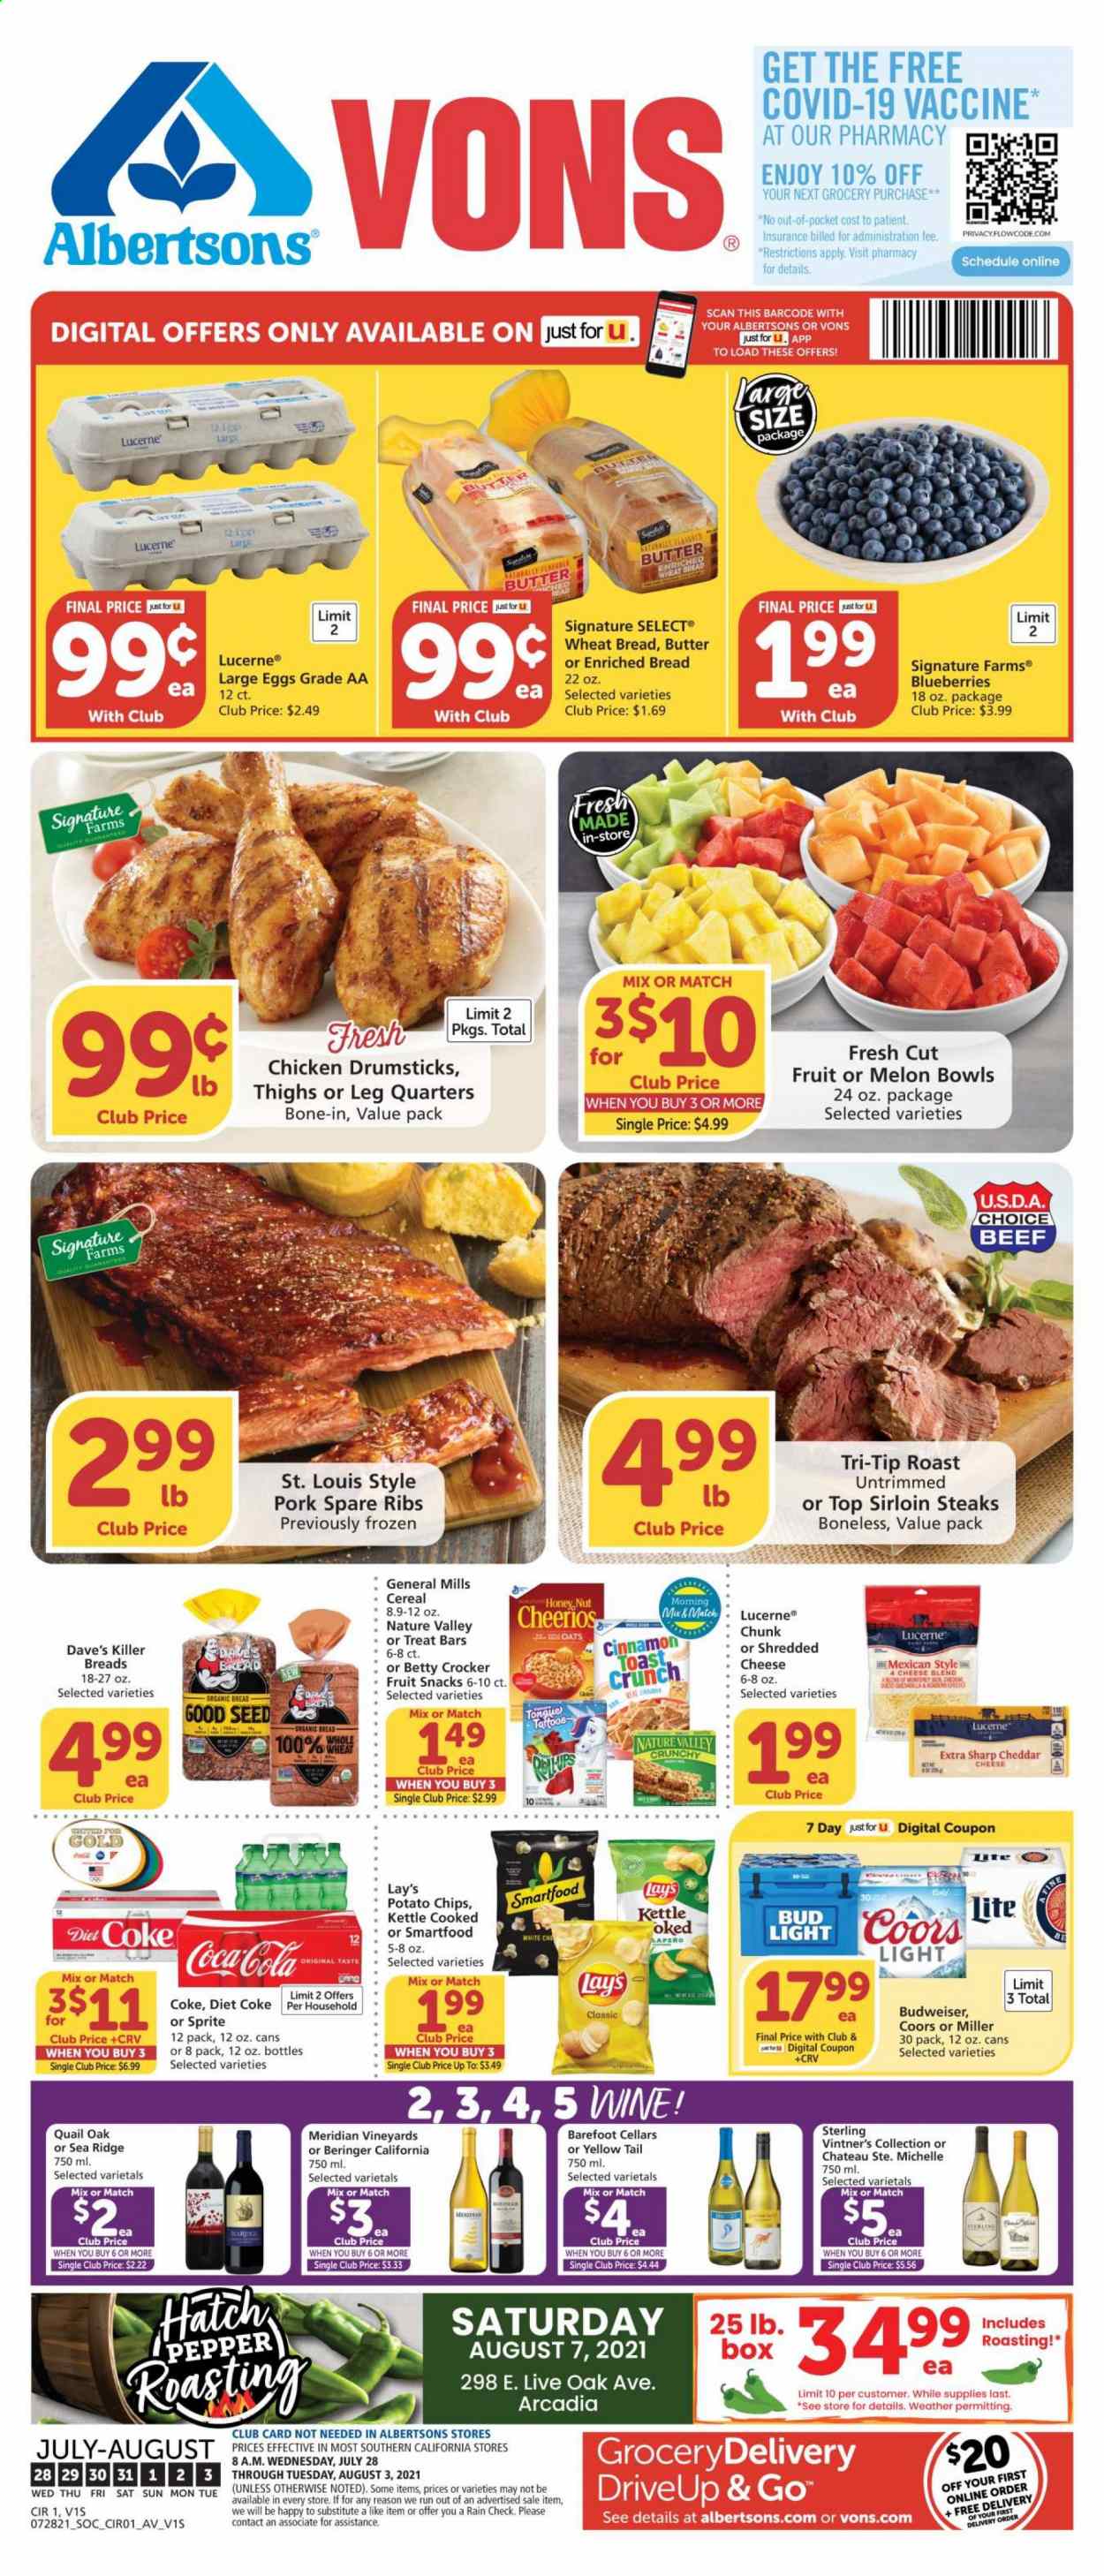 thumbnail - Albertsons Flyer - 07/28/2021 - 08/03/2021 - Sales products - Budweiser, Coors, wheat bread, blueberries, shredded cheese, large eggs, butter, fruit snack, potato chips, Lay’s, Smartfood, oats, cereals, Cheerios, Nature Valley, cinnamon, Coca-Cola, Sprite, Diet Coke, wine, Quail Oak, Ron Pelicano, beer, Bud Light, Miller, chicken drumsticks, steak, sirloin steak, pork meat, pork ribs, pork spare ribs, plant seeds, melons. Page 1.